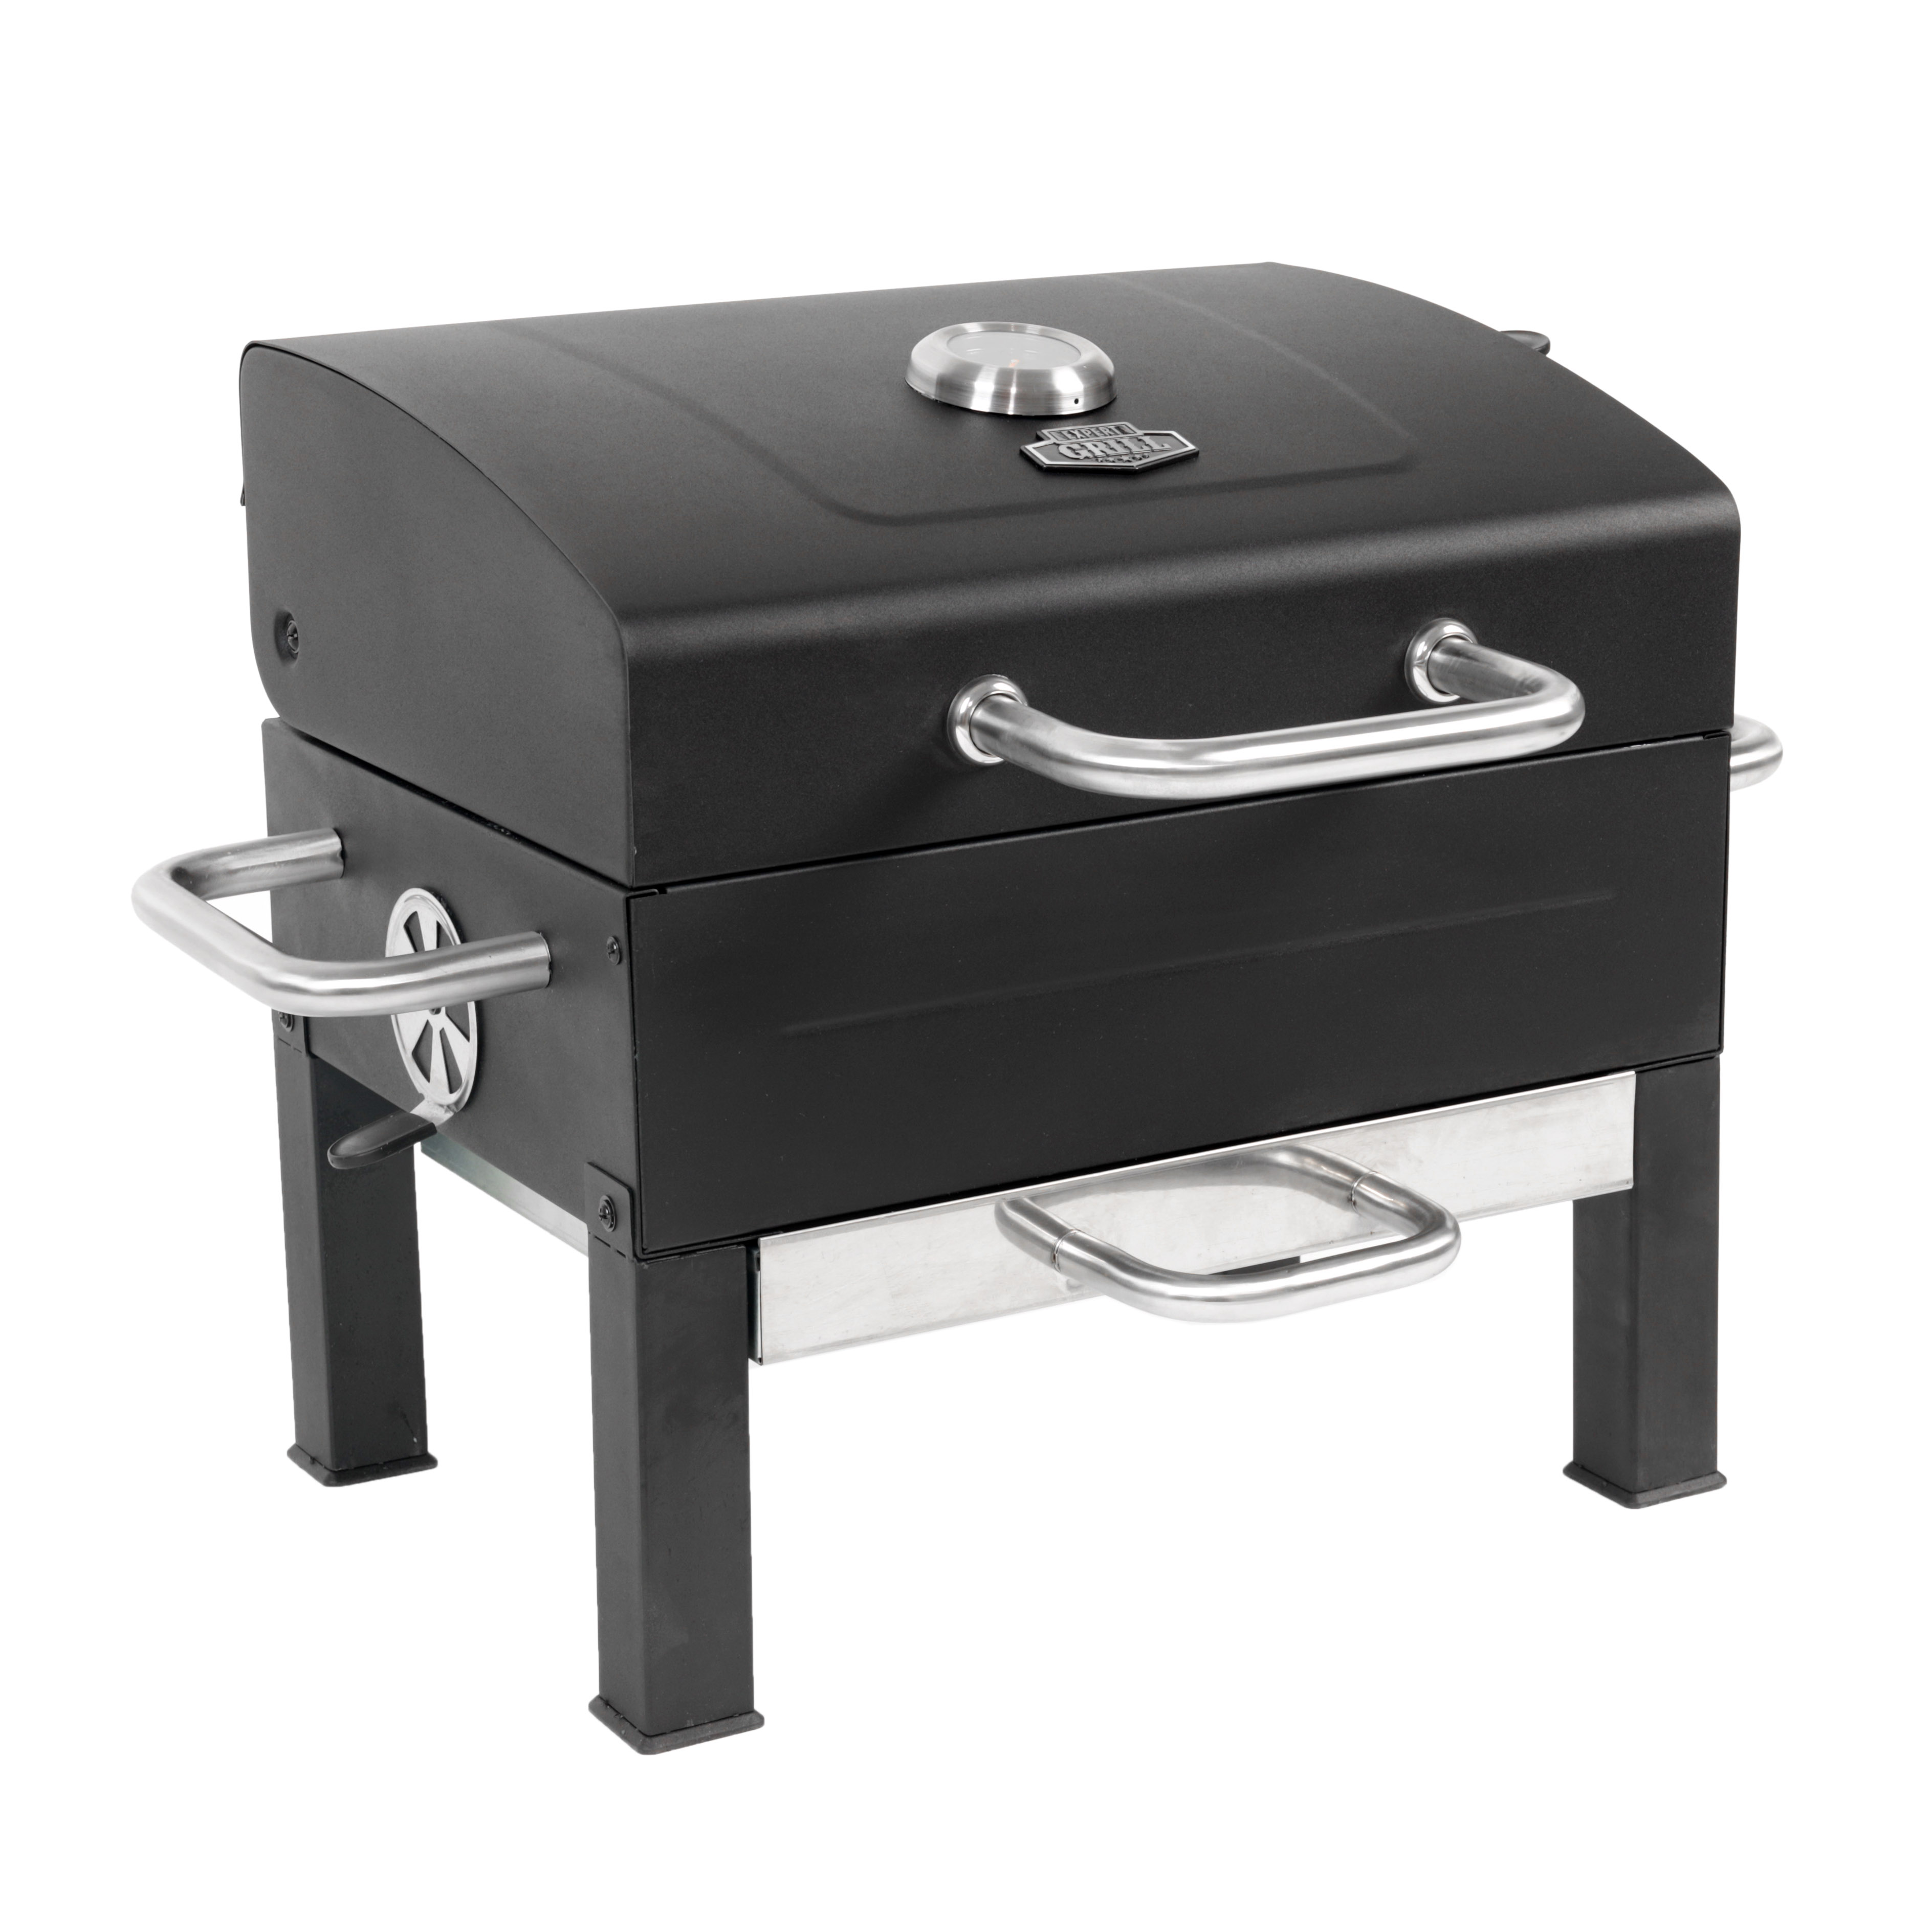 Expert Grill Premium Portable Charcoal Grill, Black and Stainless Steel - image 9 of 18